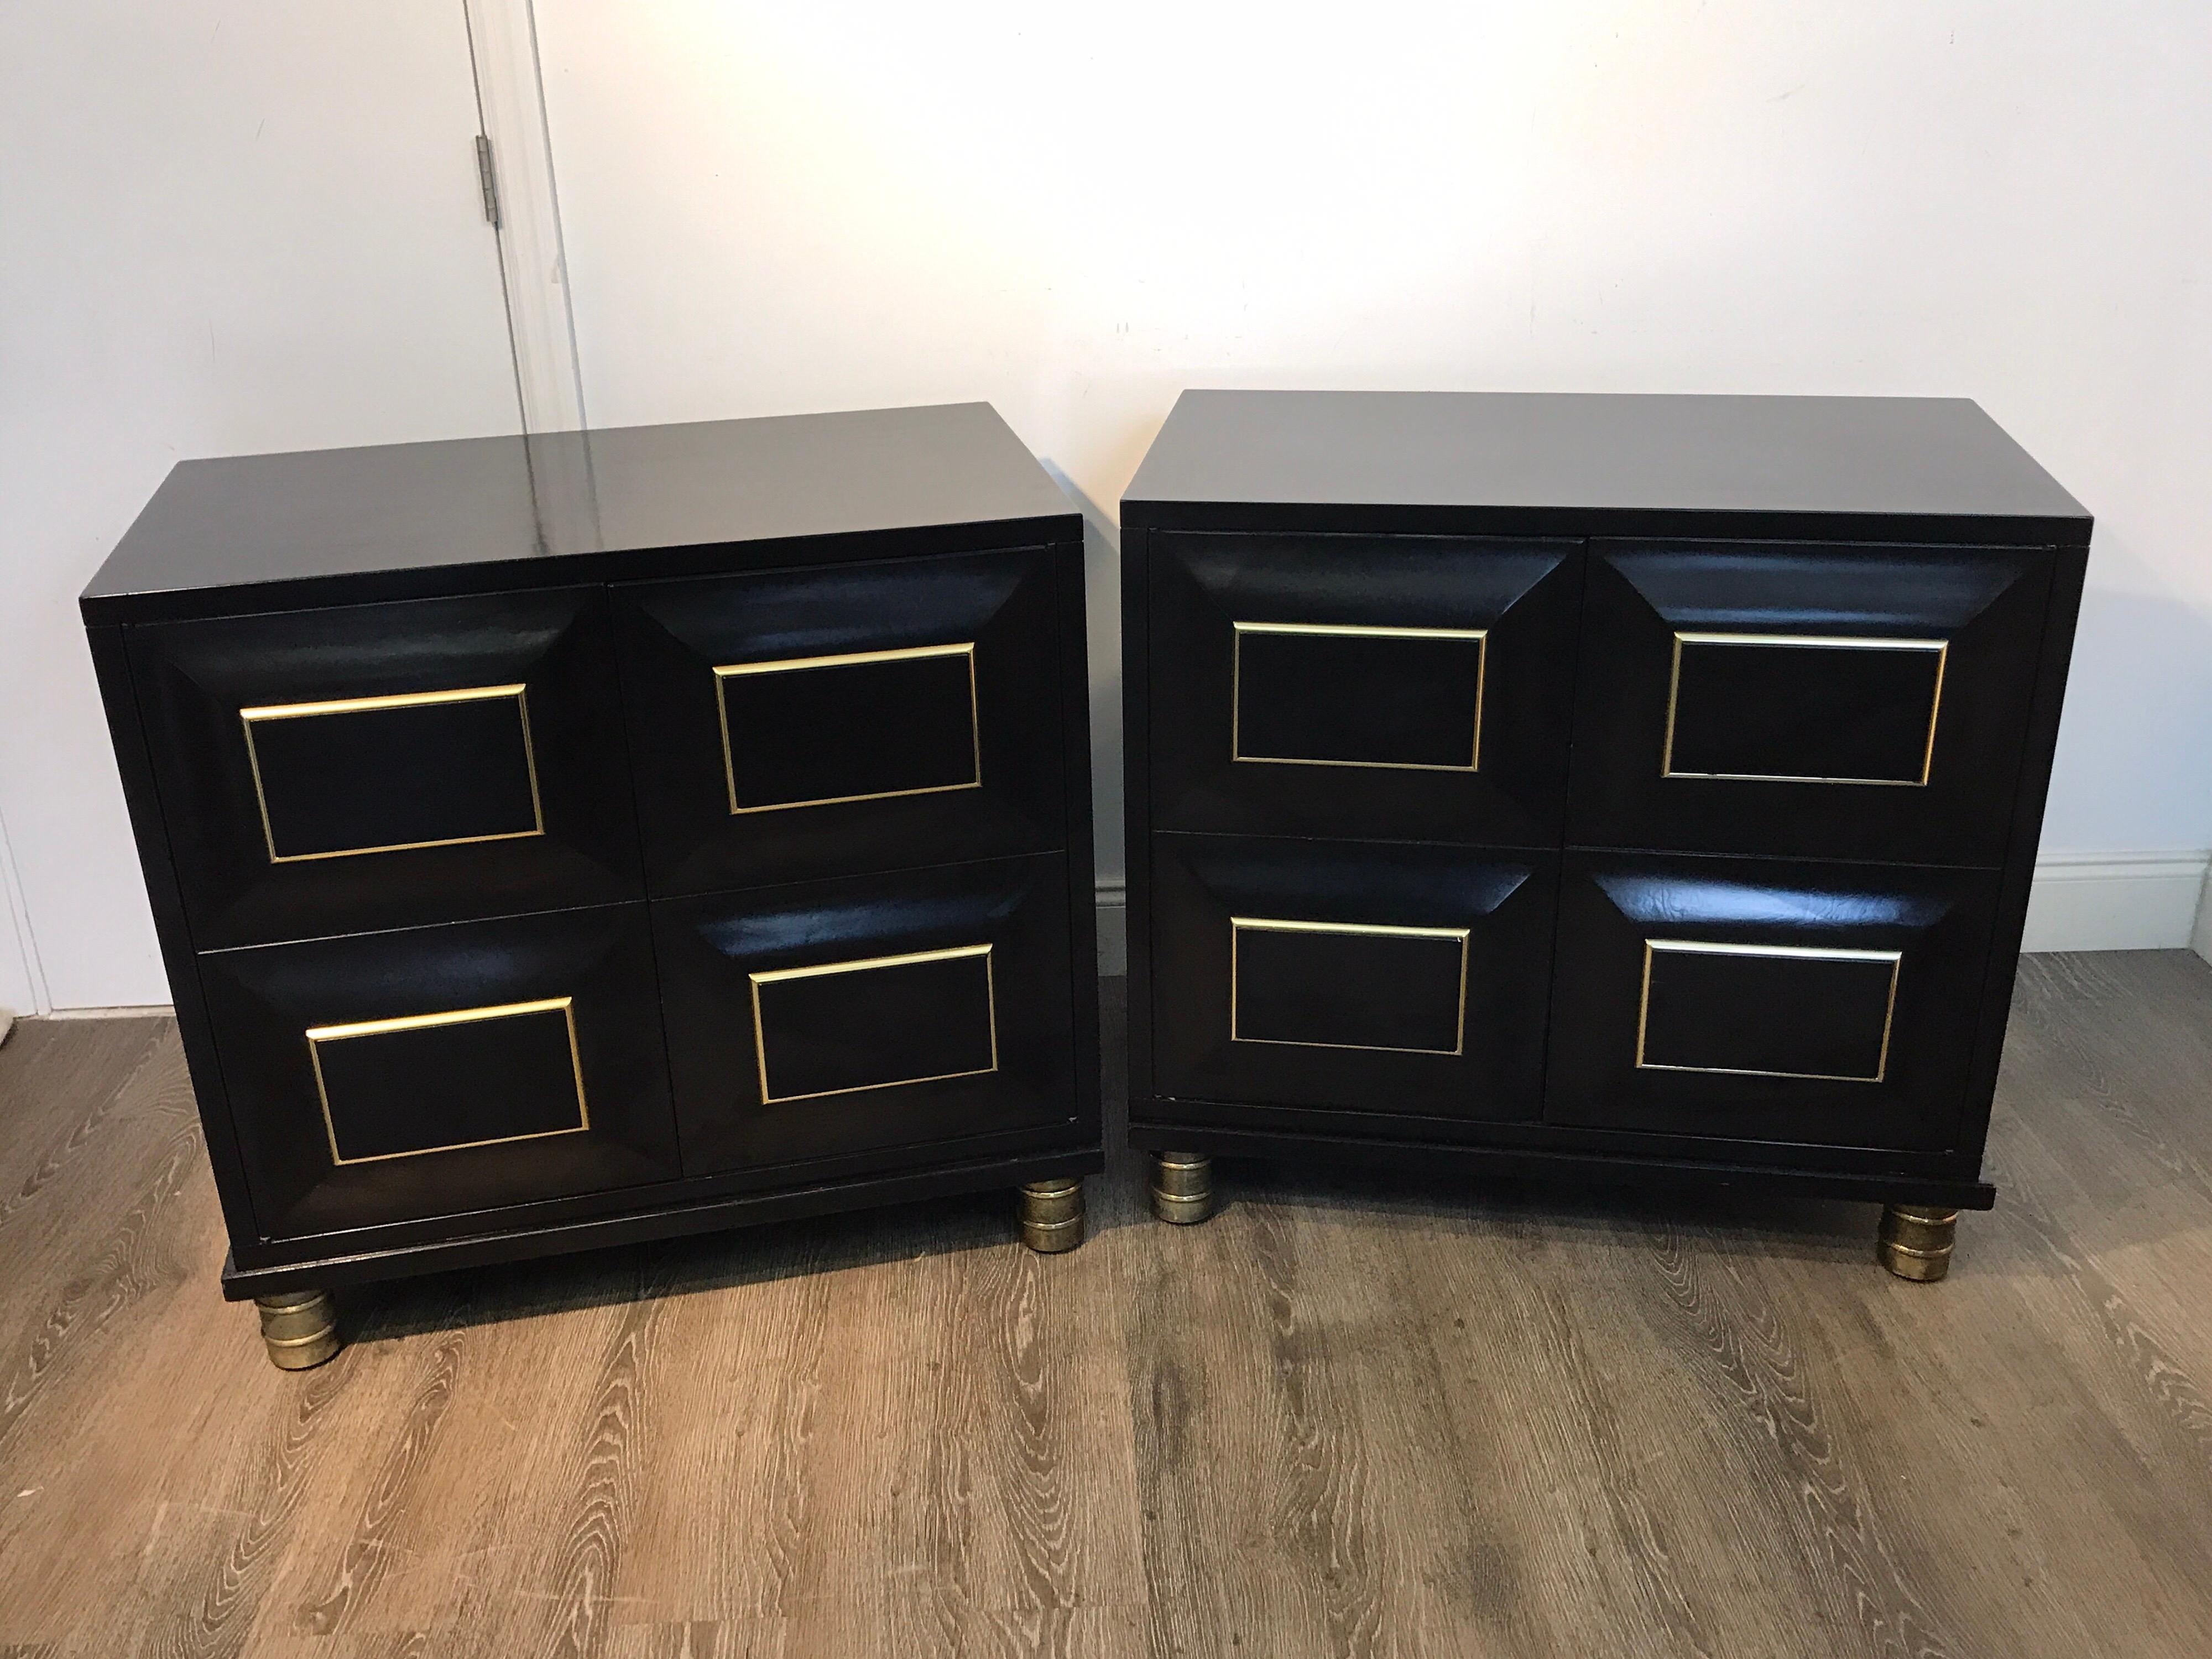 Pair of mastercraft black lacquer and brass block front cabinets, each one fitted with two doors, revealing an interior fitted with one 5